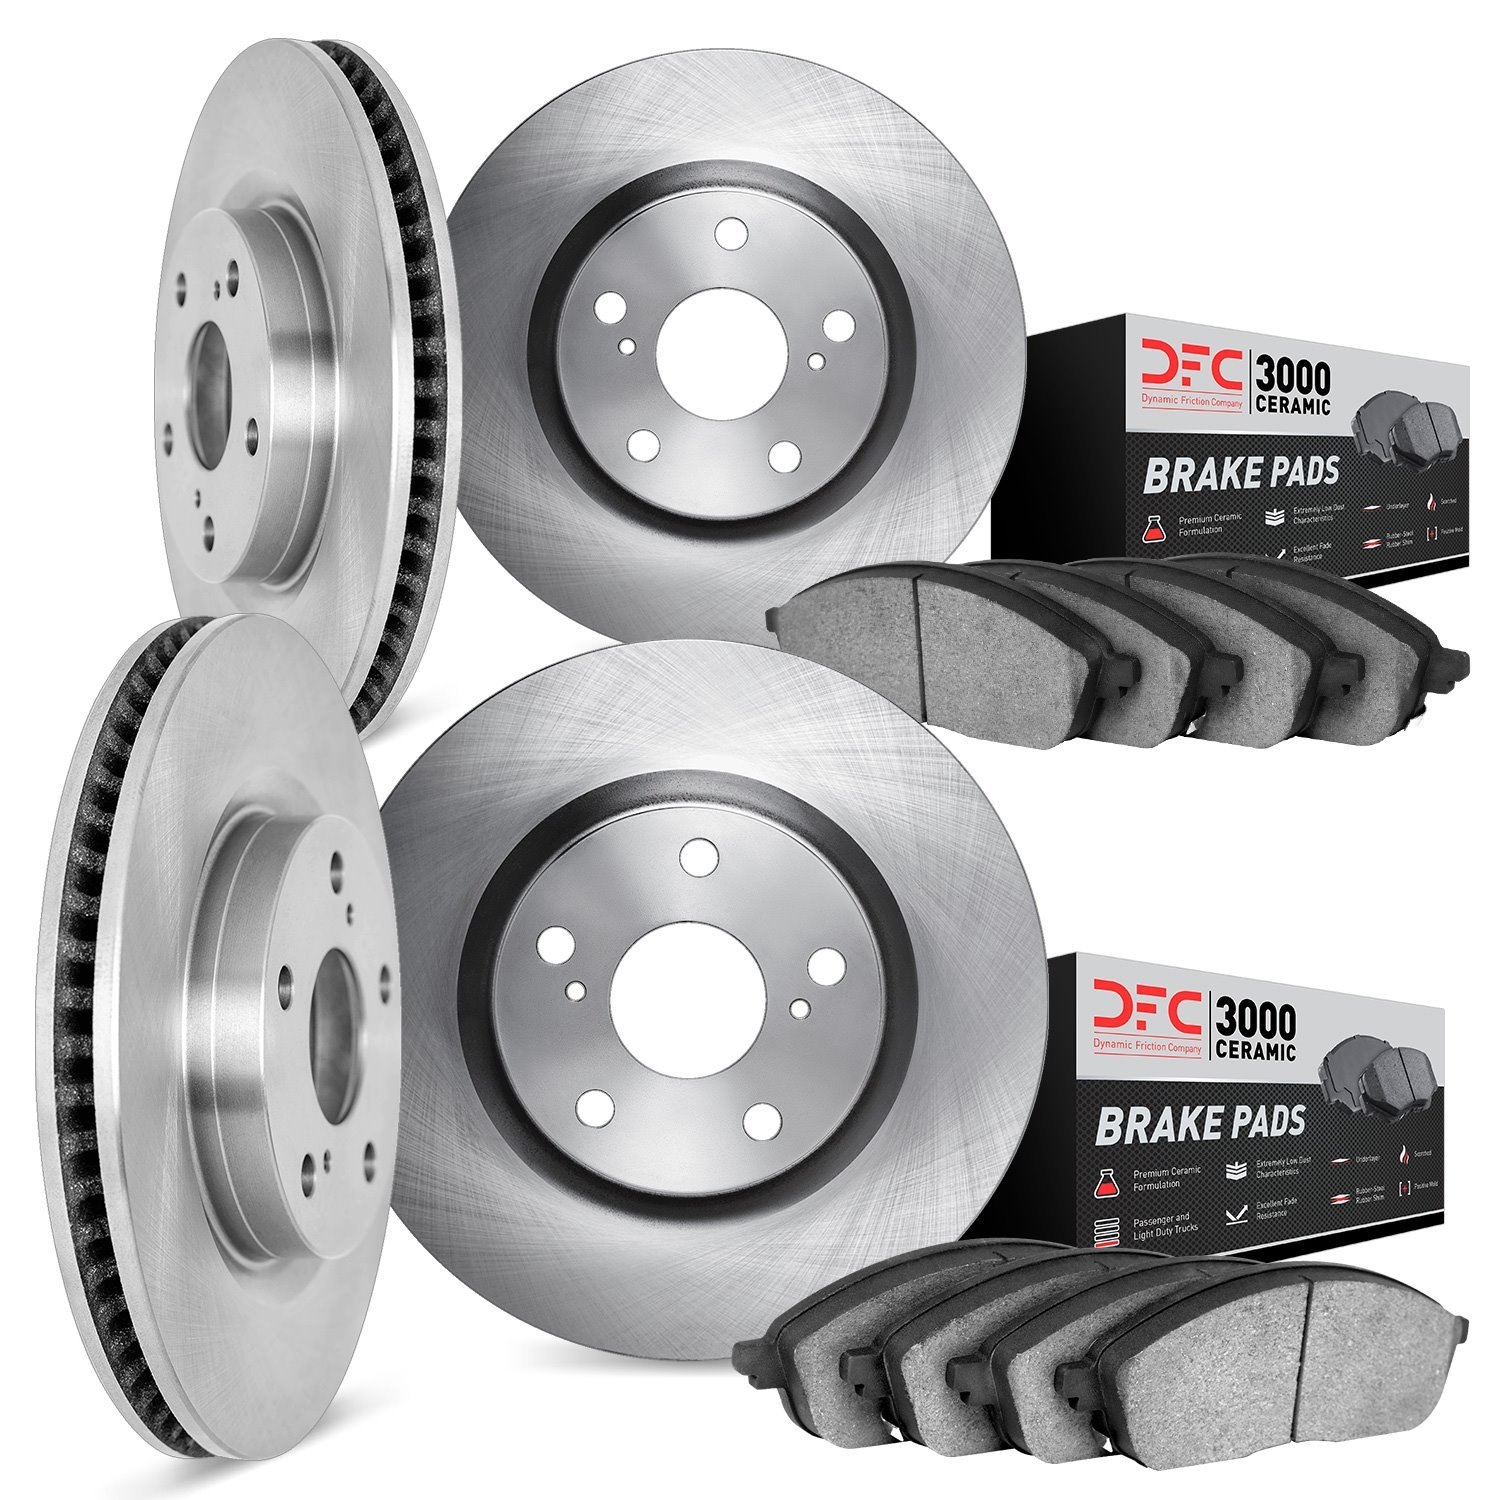 6304-75027 Brake Rotors with 3000-Series Ceramic Brake Pads Kit, 2008-2014 Lexus/Toyota/Scion, Position: Front and Rear